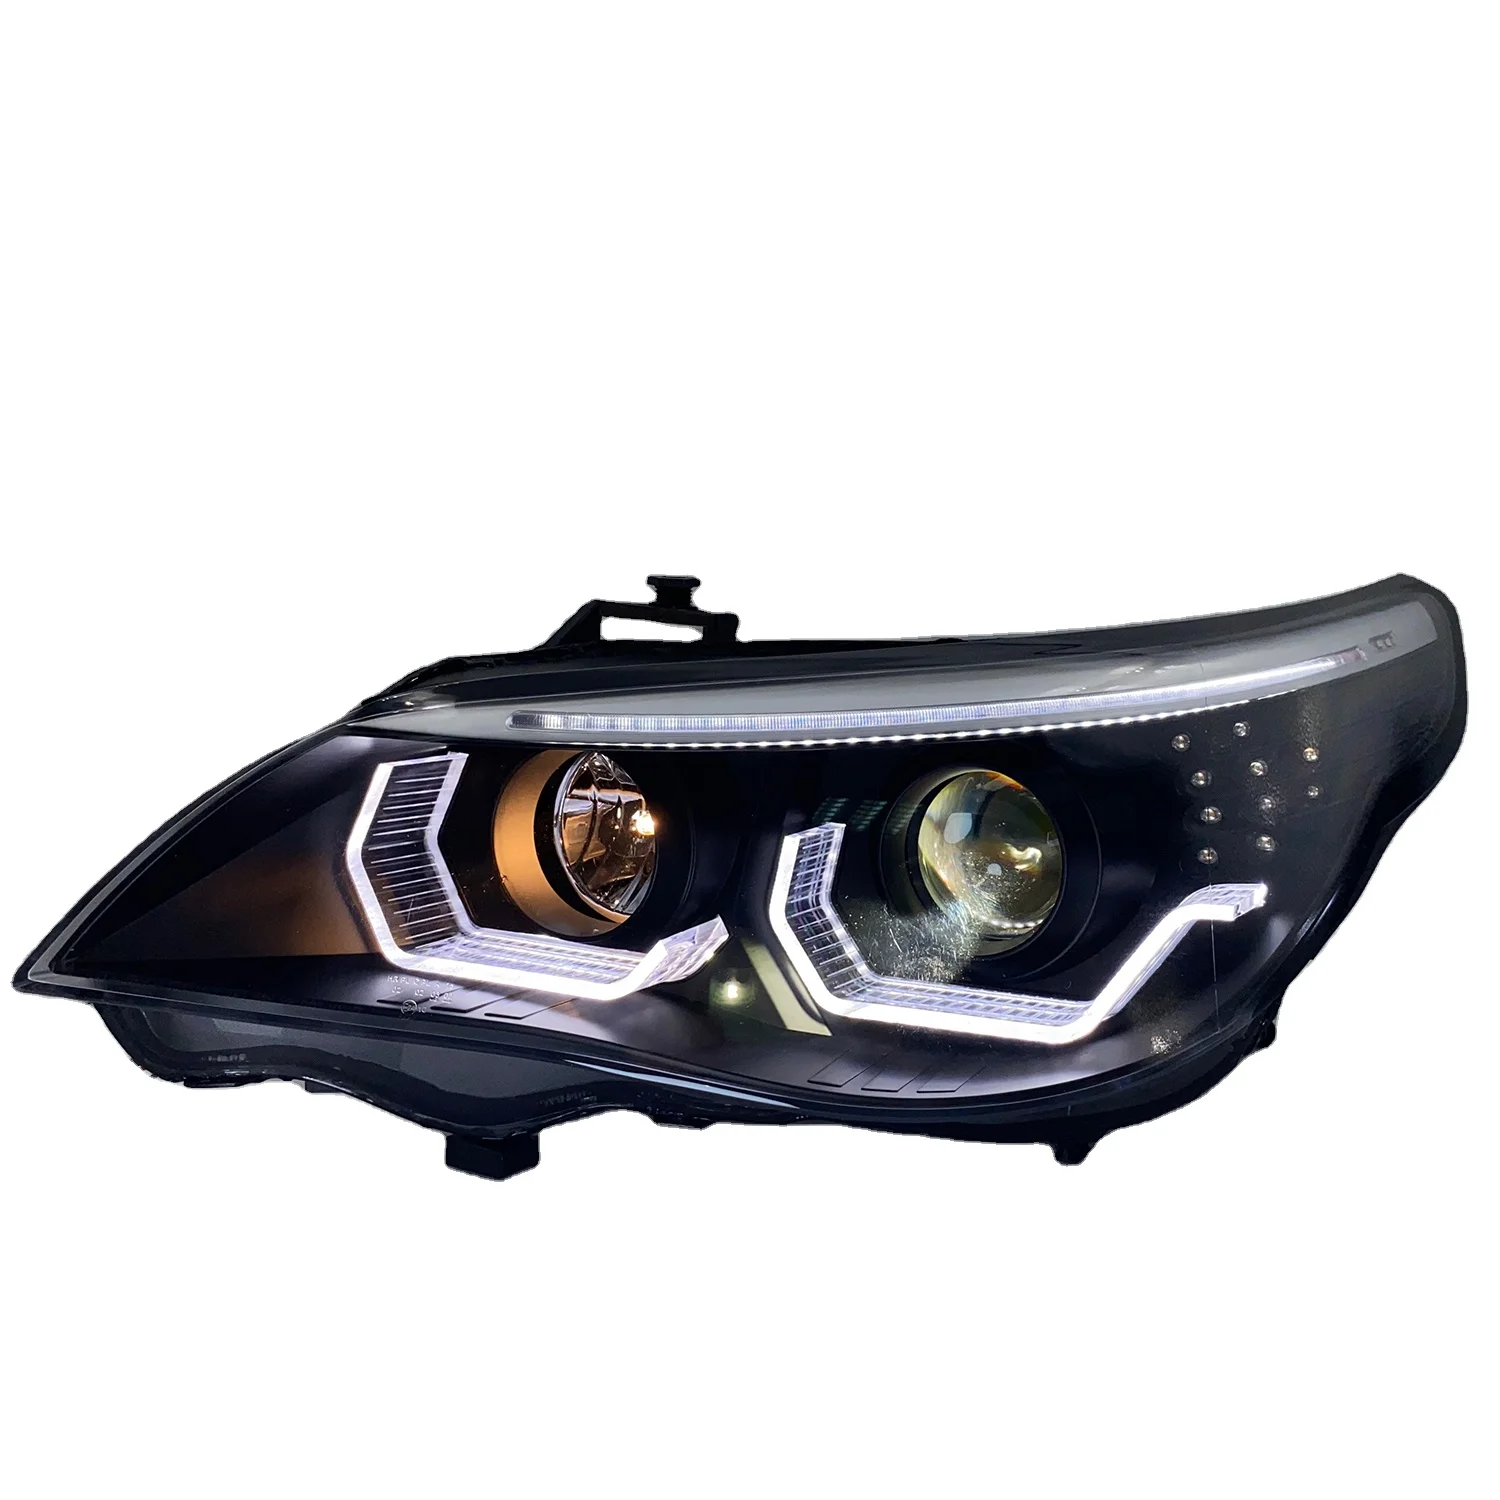  Feux Phares Pour BMW 523i 530i E60 2003-2009 Phare De Voiture  Phares Angel Eye Phare LED DRL Hid Bi Xénon Accessoires Style (Couleur :  Headlight No Bulb, Taille : For 03-07)